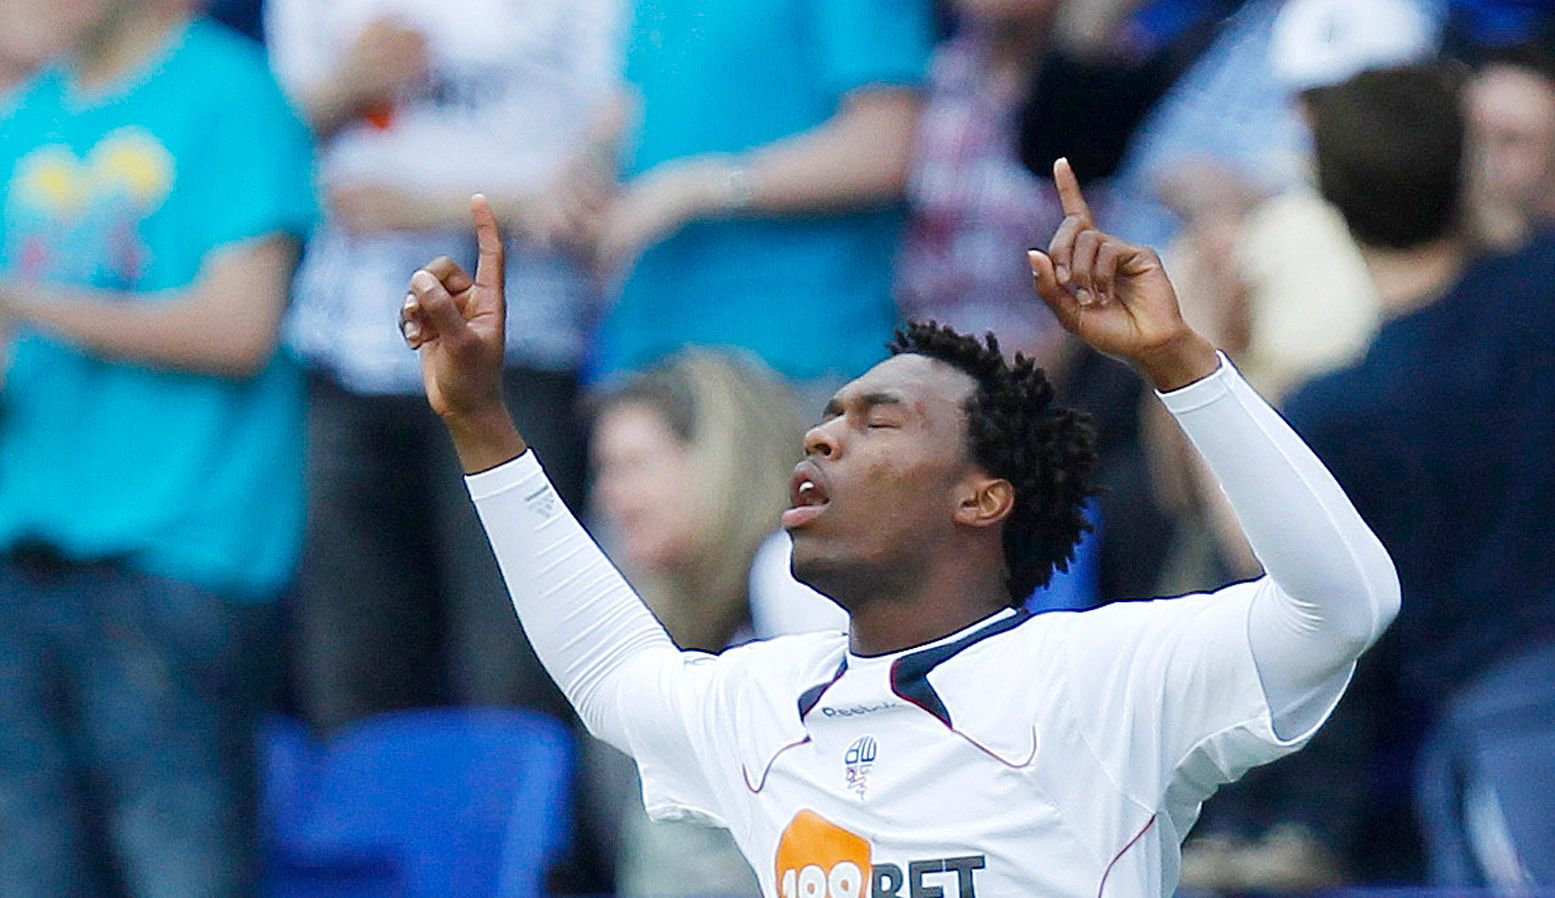 Football - Bolton Wanderers v West Ham United Barclays Premier League  - The Reebok Stadium - 10/11 - 9/4/11 
Bolton Wanderers Daniel Sturridge celebrates scoring his sides first goal  
Mandatory Credit: Action Images / Jason Cairnduff 
Livepic 
NO ONLINE/INTERNET USE WITHOUT A LICENCE FROM THE FOOTBALL DATA CO LTD. FOR LICENCE ENQUIRIES PLEASE TELEPHONE +44 (0) 207 864 9000.